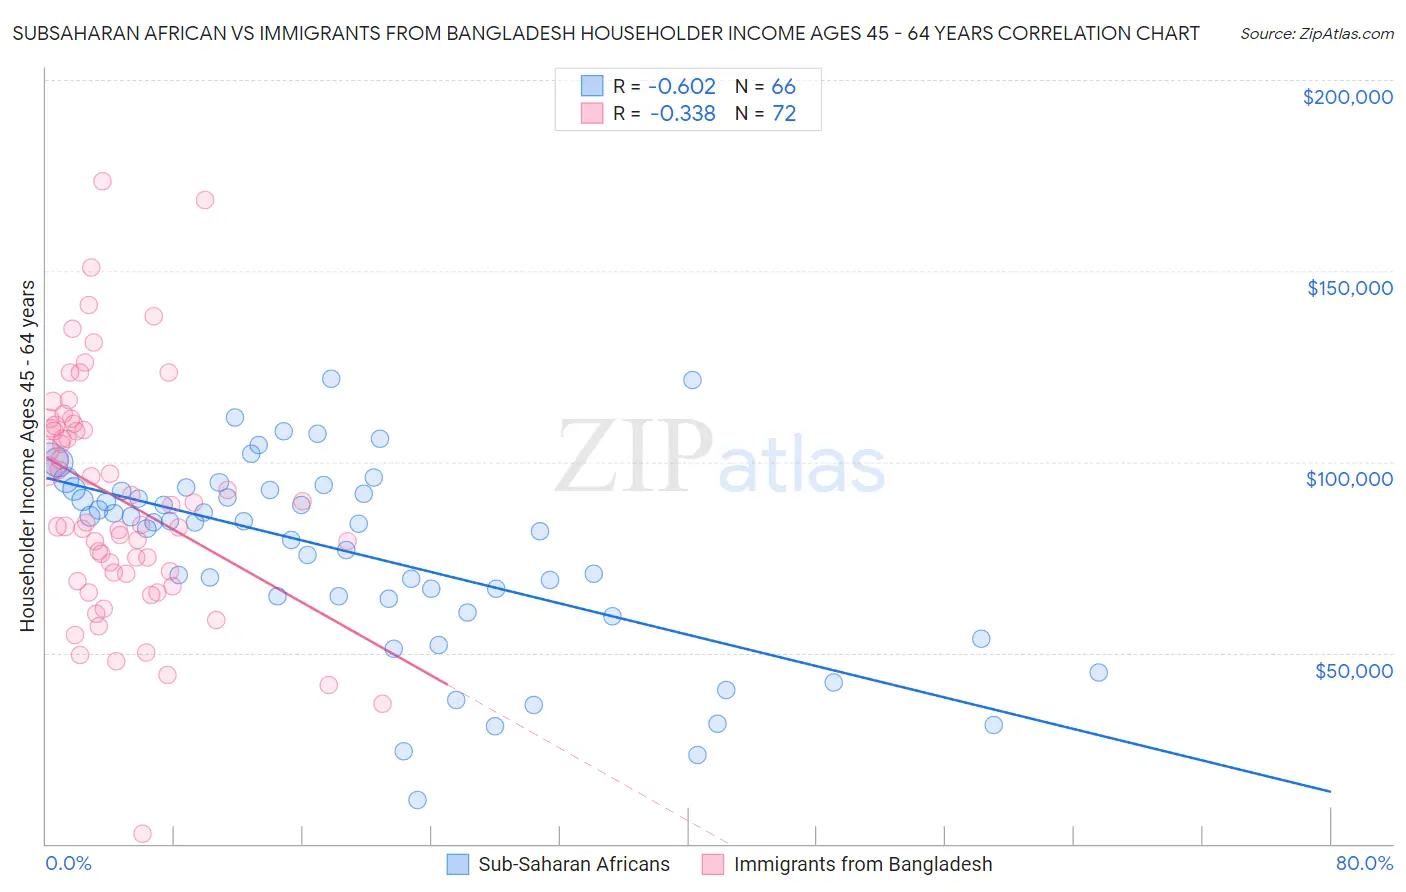 Subsaharan African vs Immigrants from Bangladesh Householder Income Ages 45 - 64 years